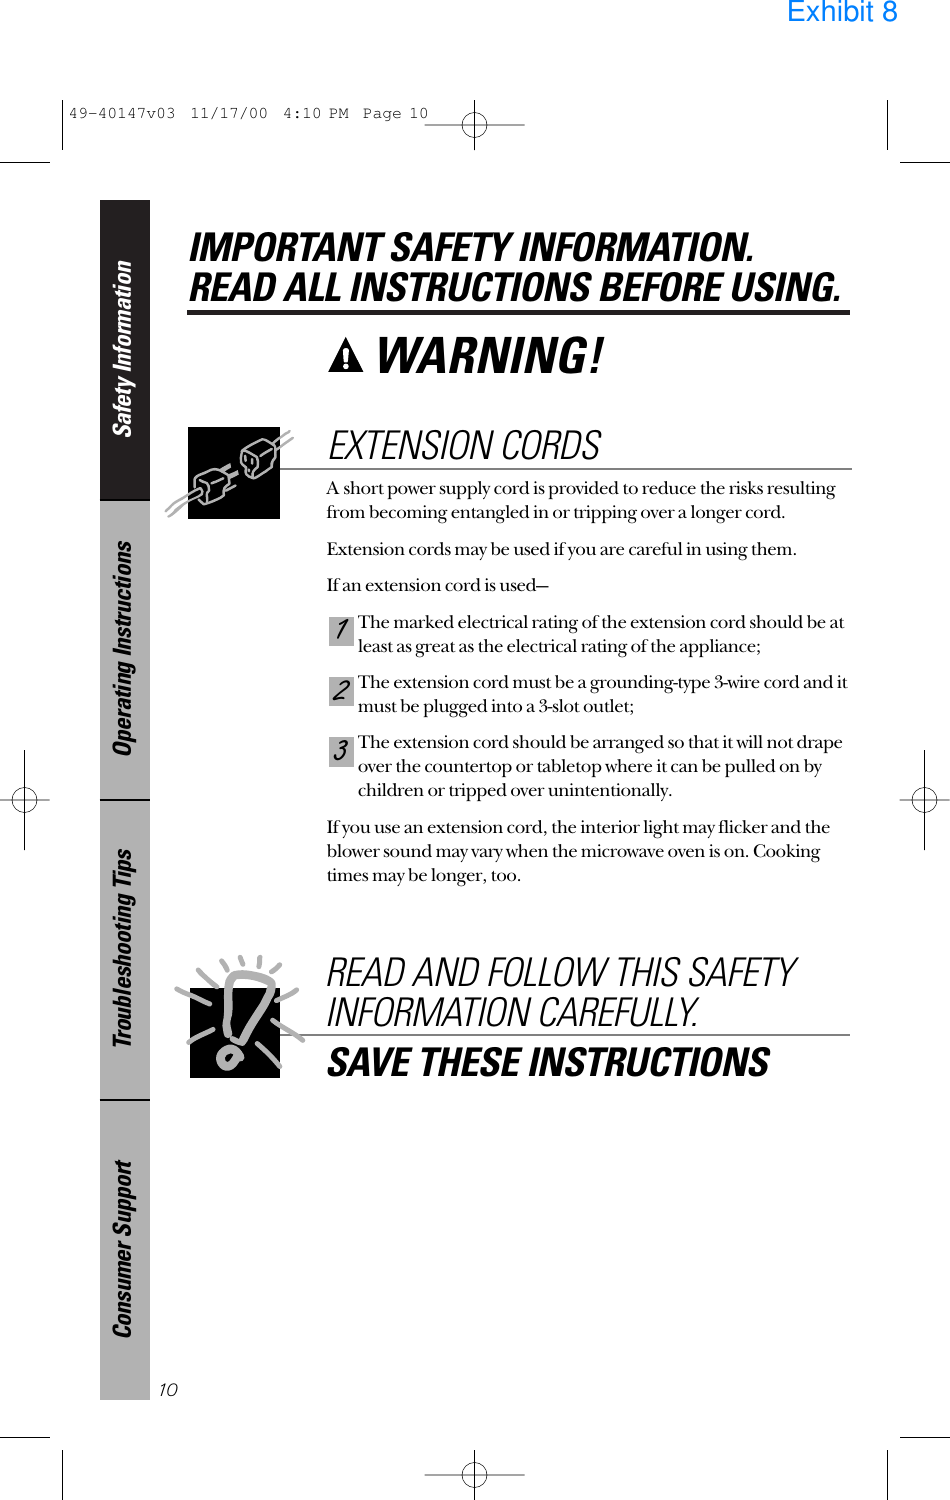 Safety InformationOperating InstructionsTroubleshooting TipsConsumer SupportIMPORTANT SAFETY INFORMATION.READ ALL INSTRUCTIONS BEFORE USING.10WARNING! A short power supply cord is provided to reduce the risks resultingfrom becoming entangled in or tripping over a longer cord.Extension cords may be used if you are careful in using them.If an extension cord is used—The marked electrical rating of the extension cord should be atleast as great as the electrical rating of the appliance;The extension cord must be a grounding-type 3-wire cord and itmust be plugged into a 3-slot outlet;The extension cord should be arranged so that it will not drapeover the countertop or tabletop where it can be pulled on bychildren or tripped over unintentionally.If you use an extension cord, the interior light may flicker and theblower sound may vary when the microwave oven is on. Cookingtimes may be longer, too.321EXTENSION CORDSREAD AND FOLLOW THIS SAFETYINFORMATION CAREFULLY.SAVE THESE INSTRUCTIONS49-40147v03  11/17/00  4:10 PM  Page 10Exhibit 8